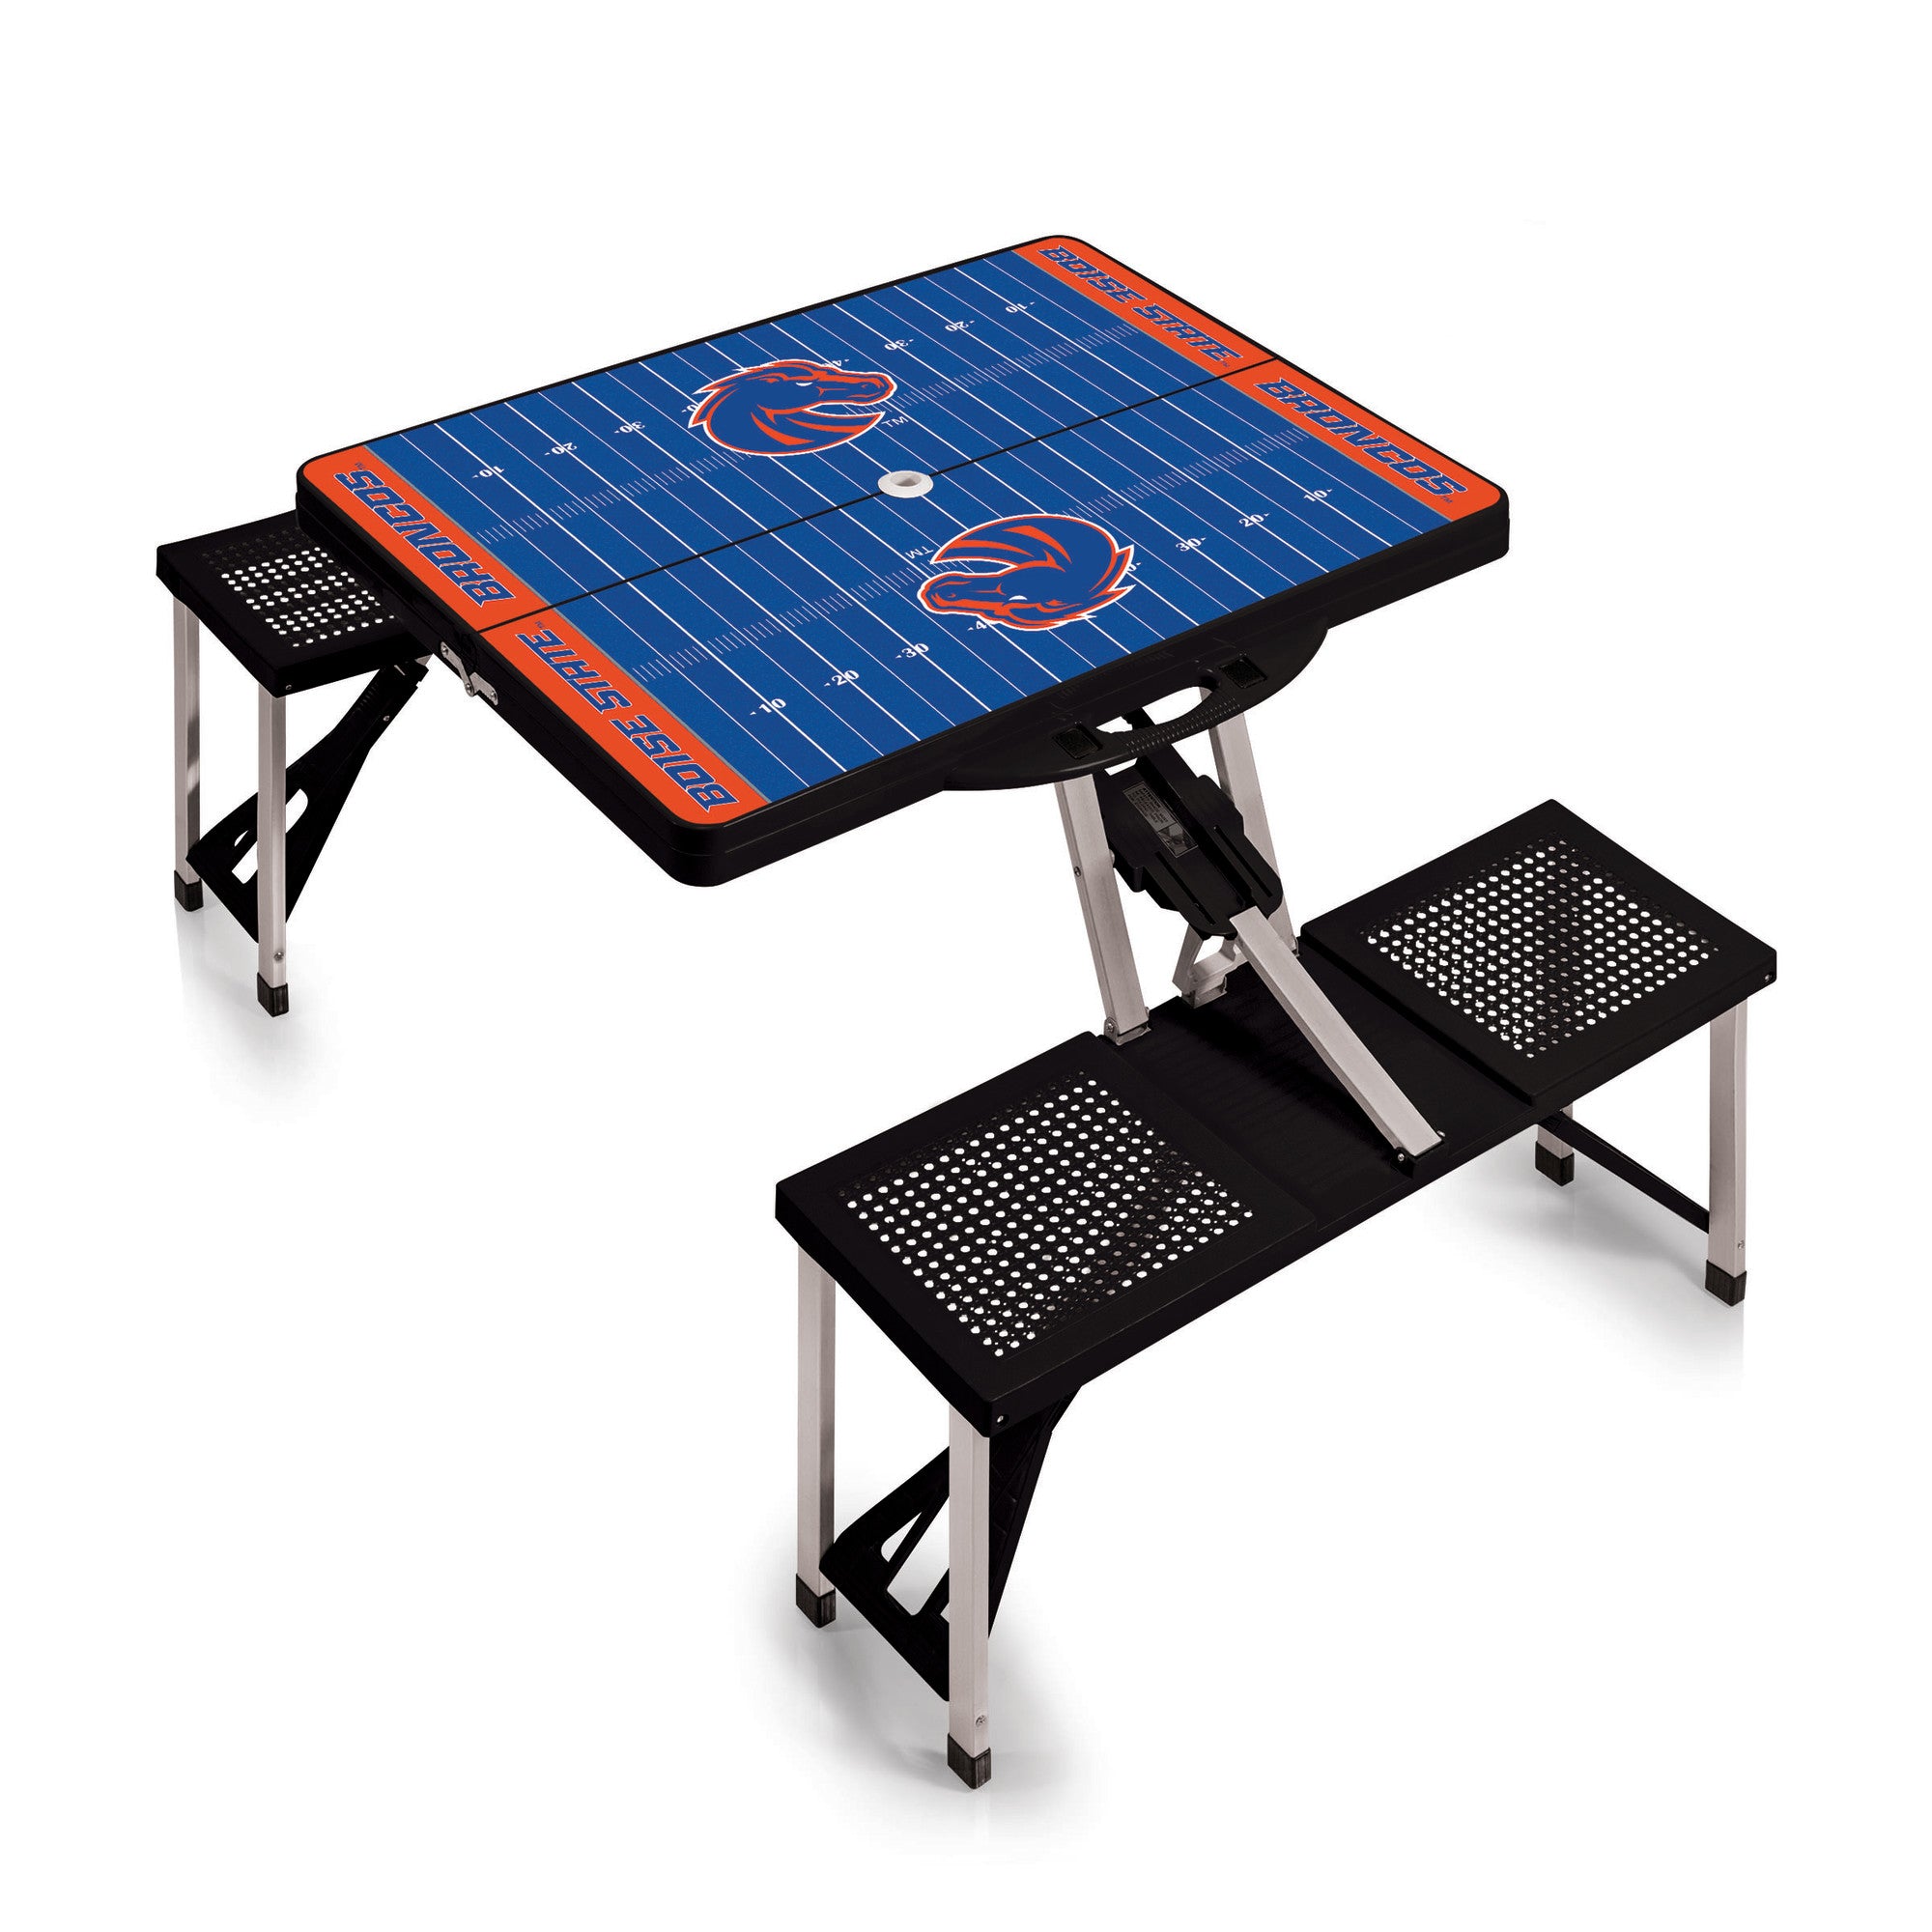 Boise State Broncos Football Field - Picnic Table Portable Folding Table with Seats